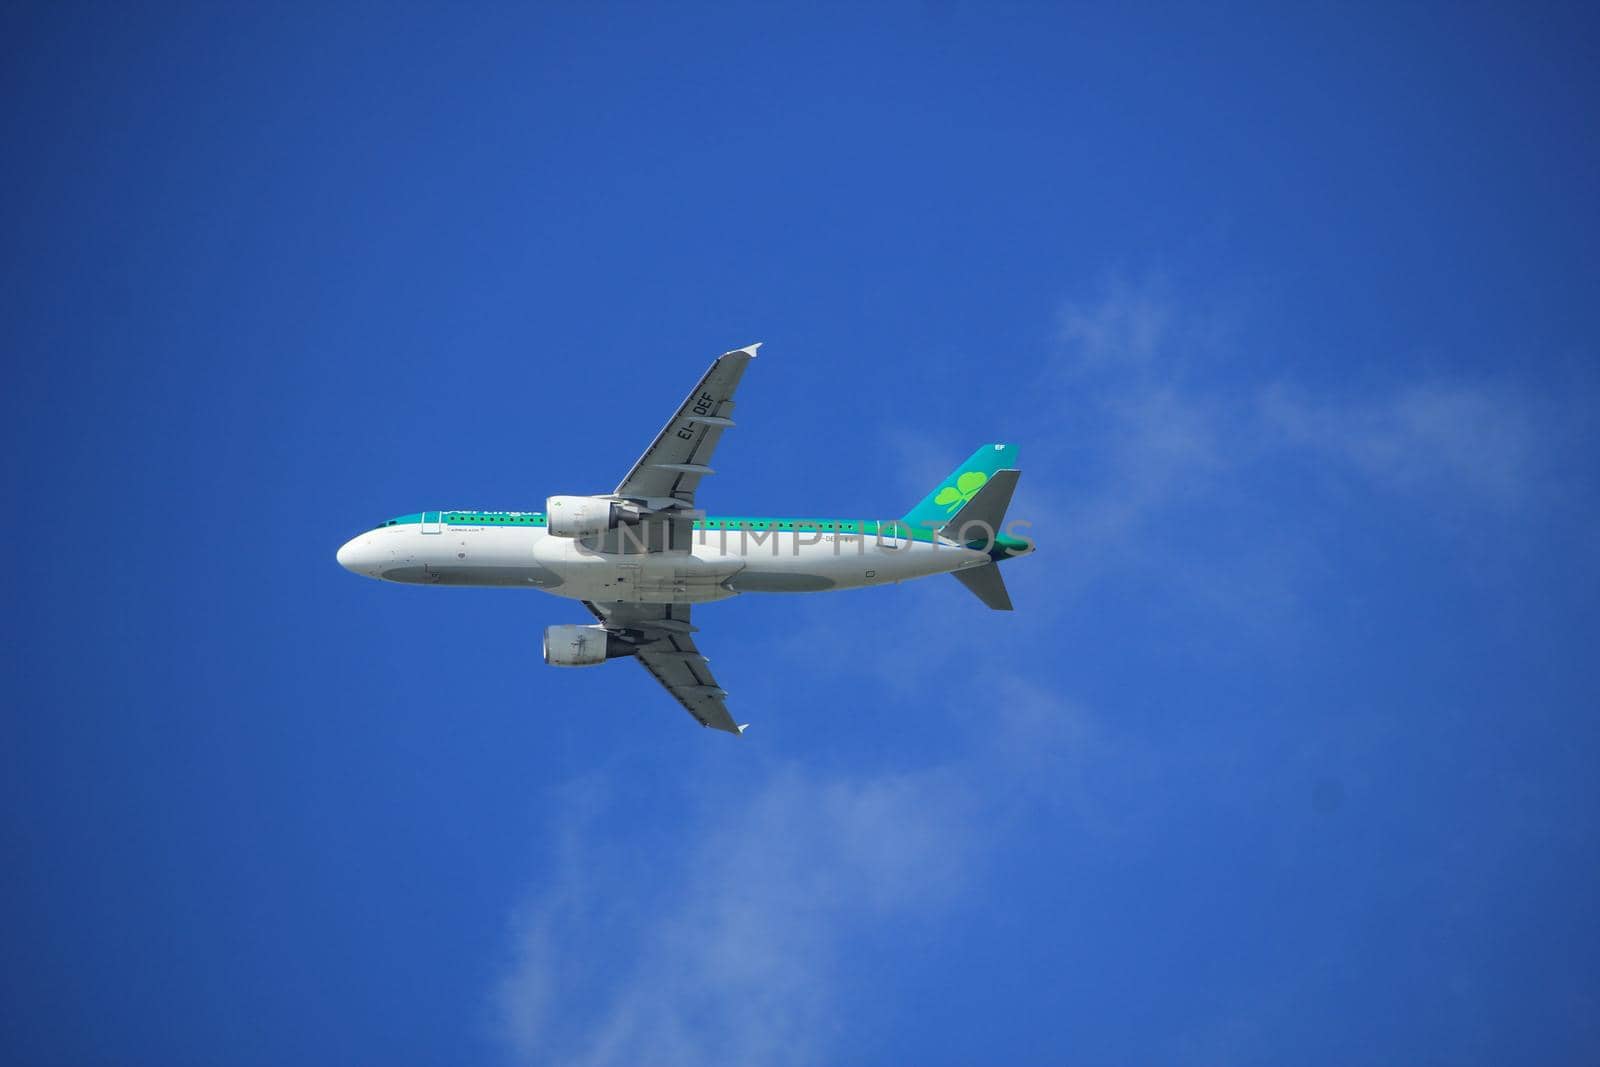 Amsterdam the Netherlands - September 23rd 2017: EI-DEF Aer Lingus Airbus A320-214 takeoff from Kaagbaan runway, Amsterdam Airport Schiphol